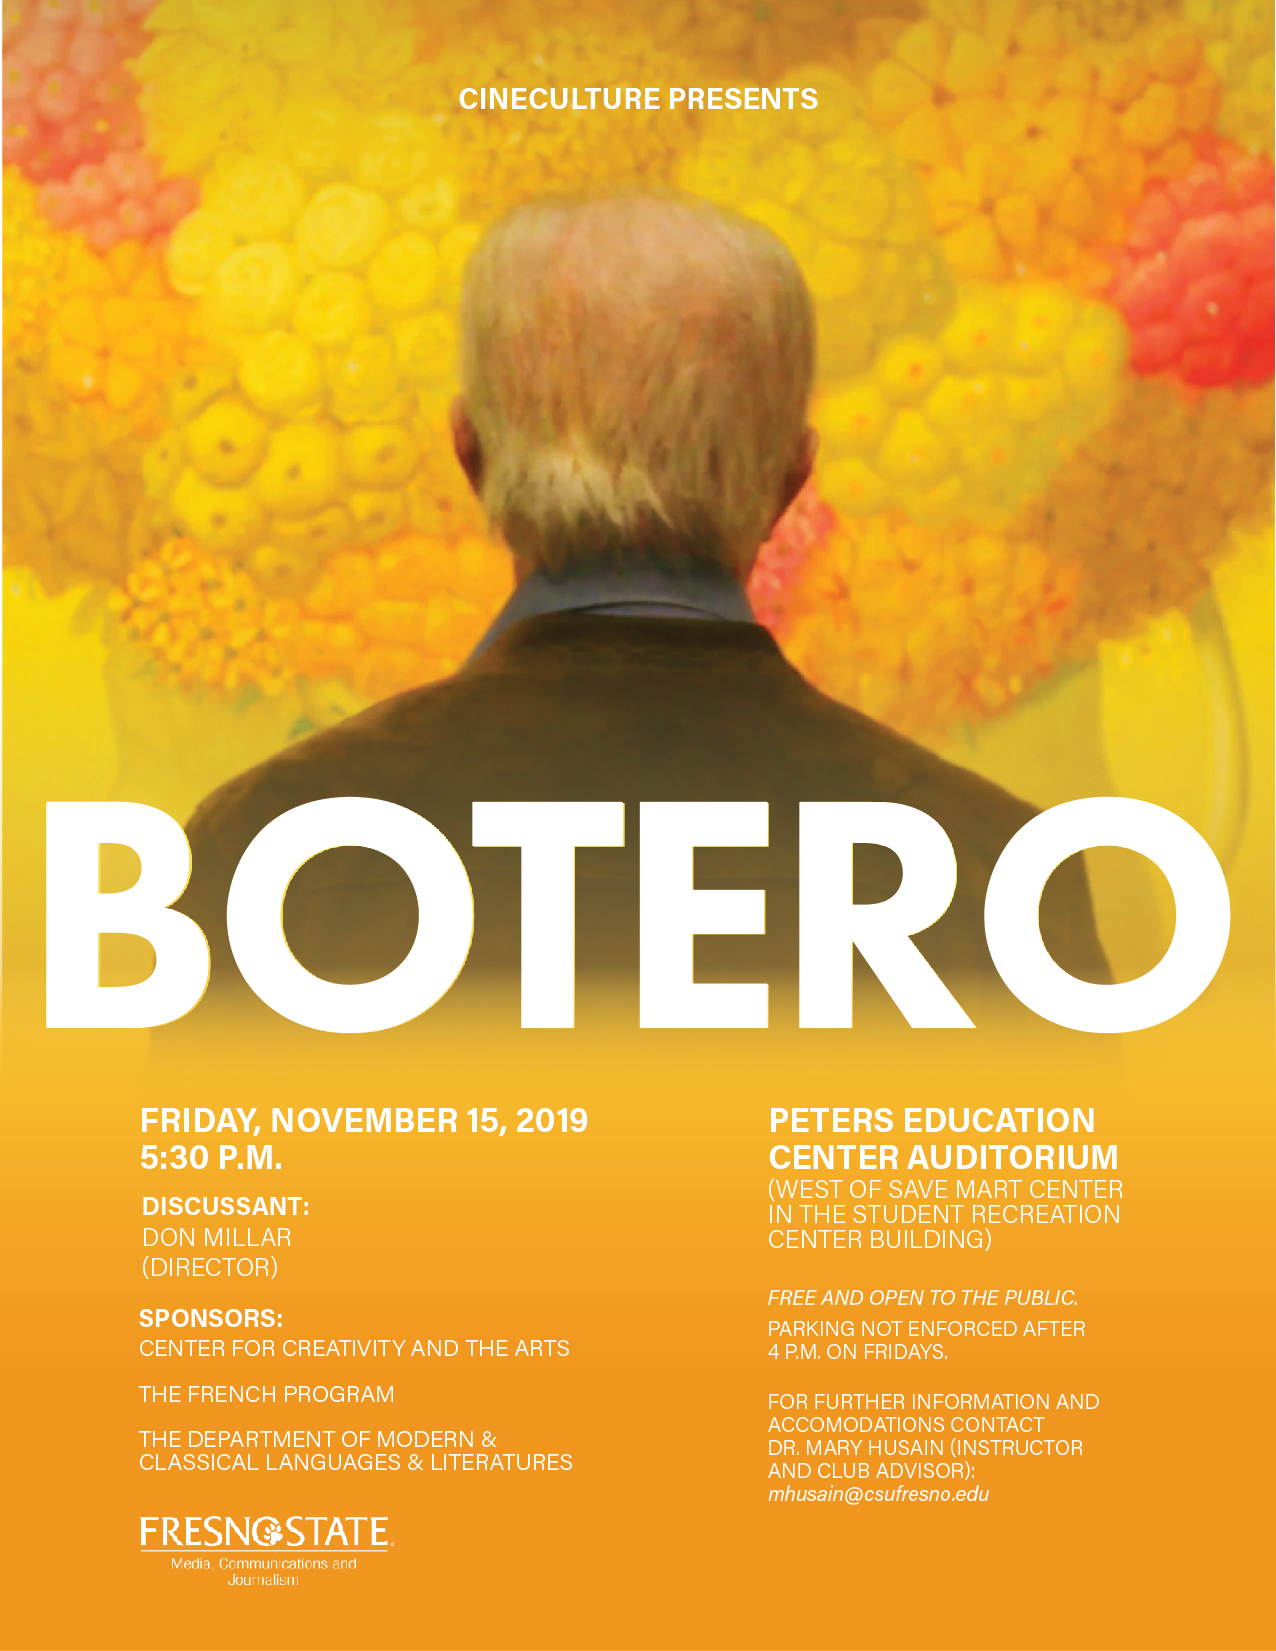 cineculture botero SCREEN_REVISED